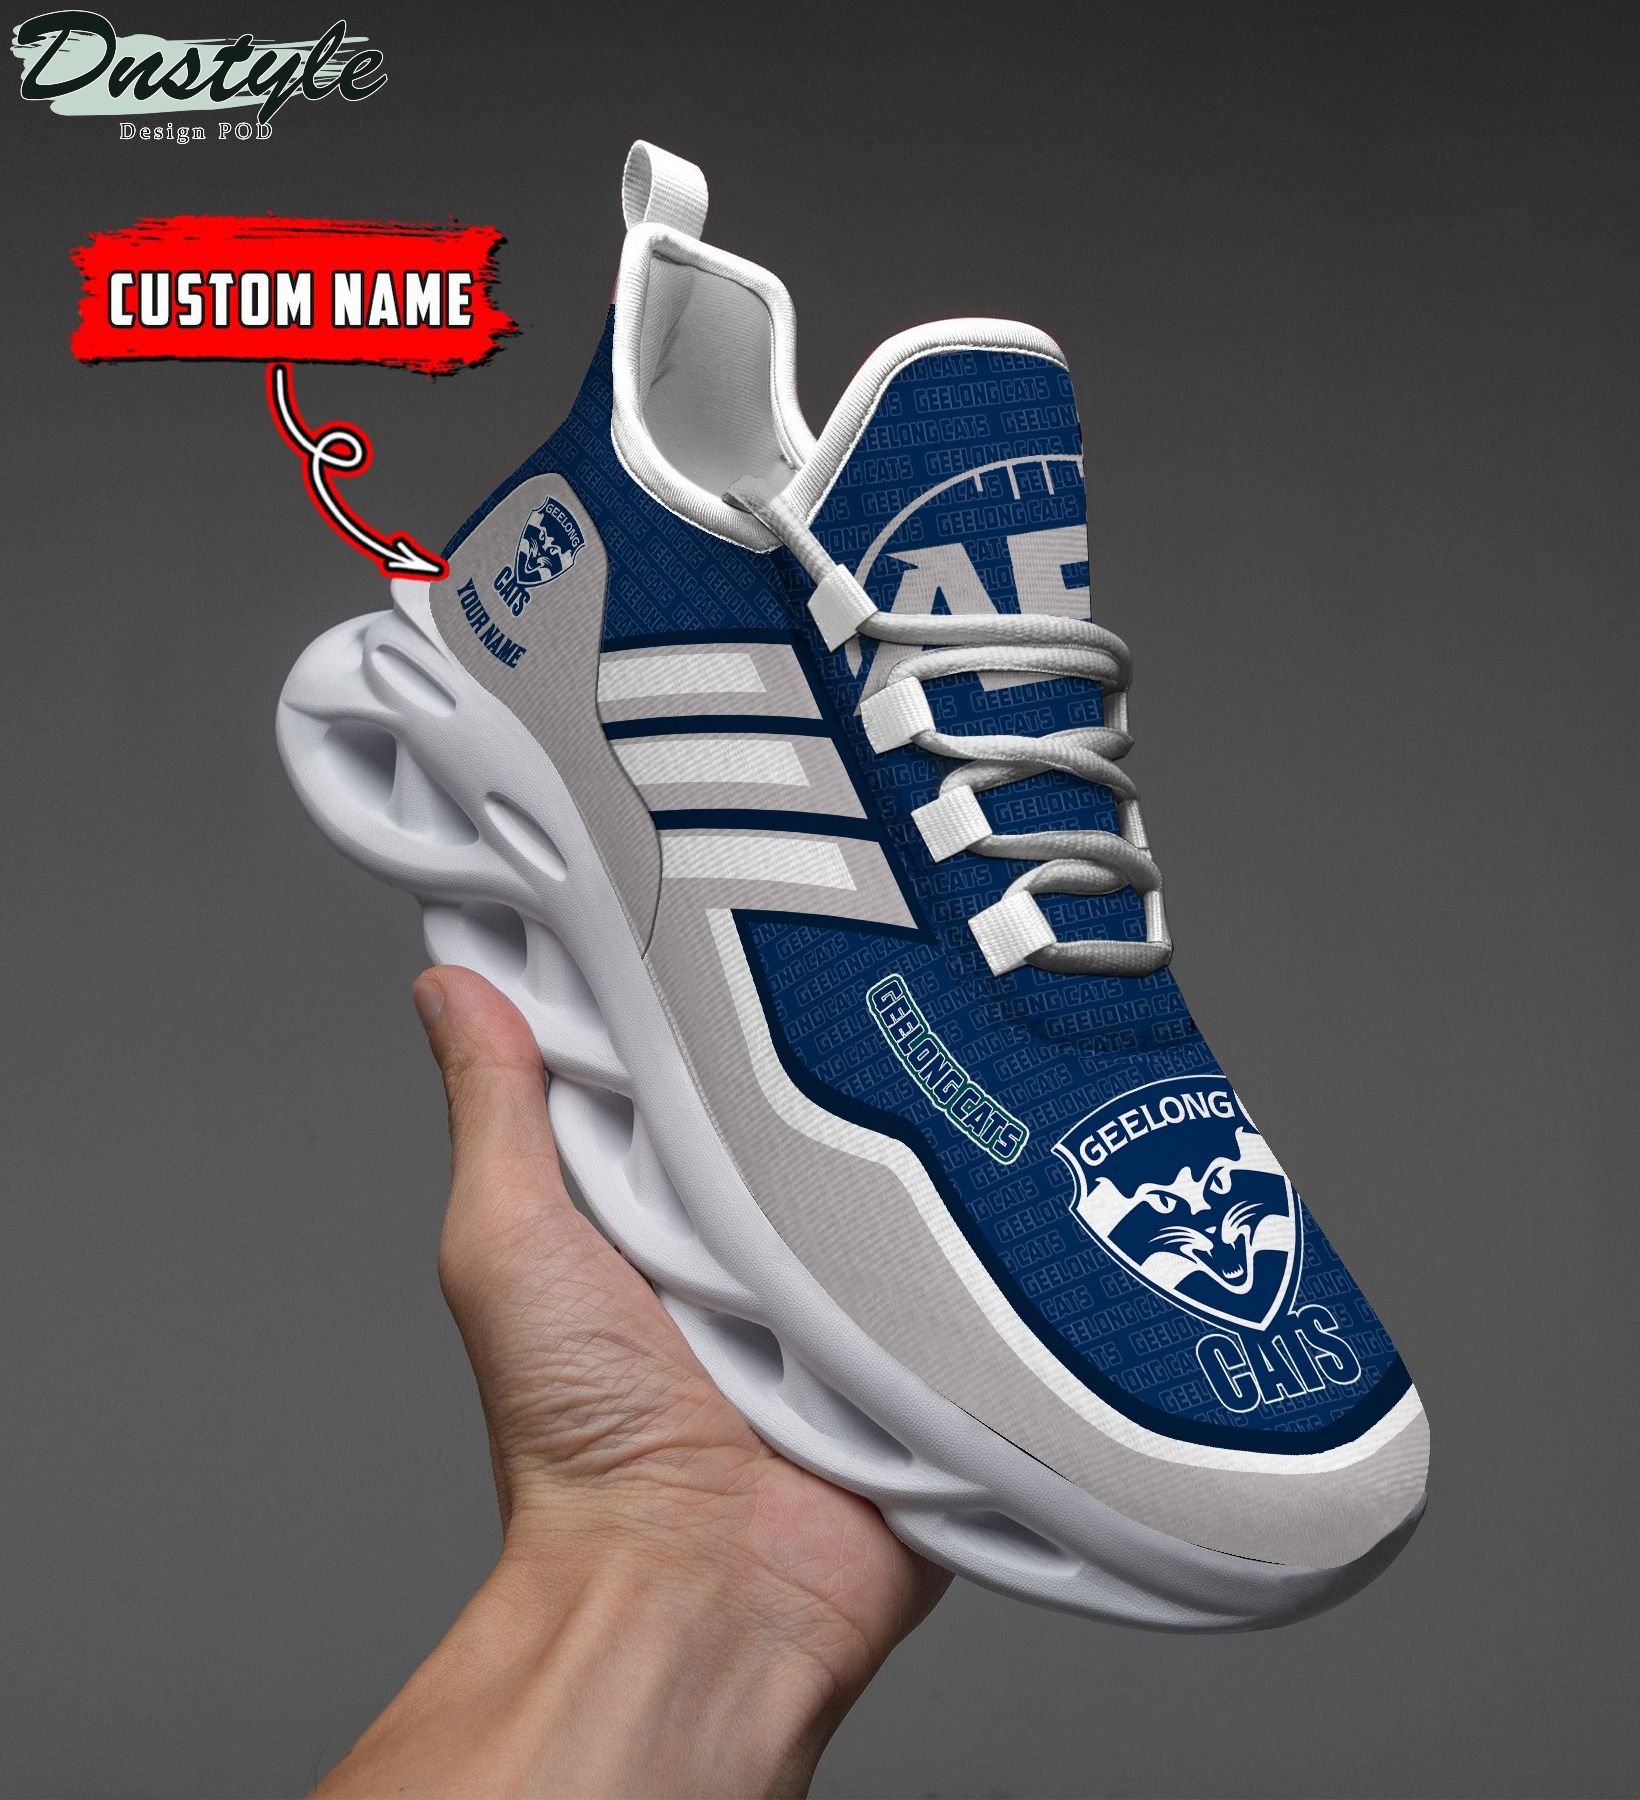 Geelong cats AFL personalized clunky max soul shoes